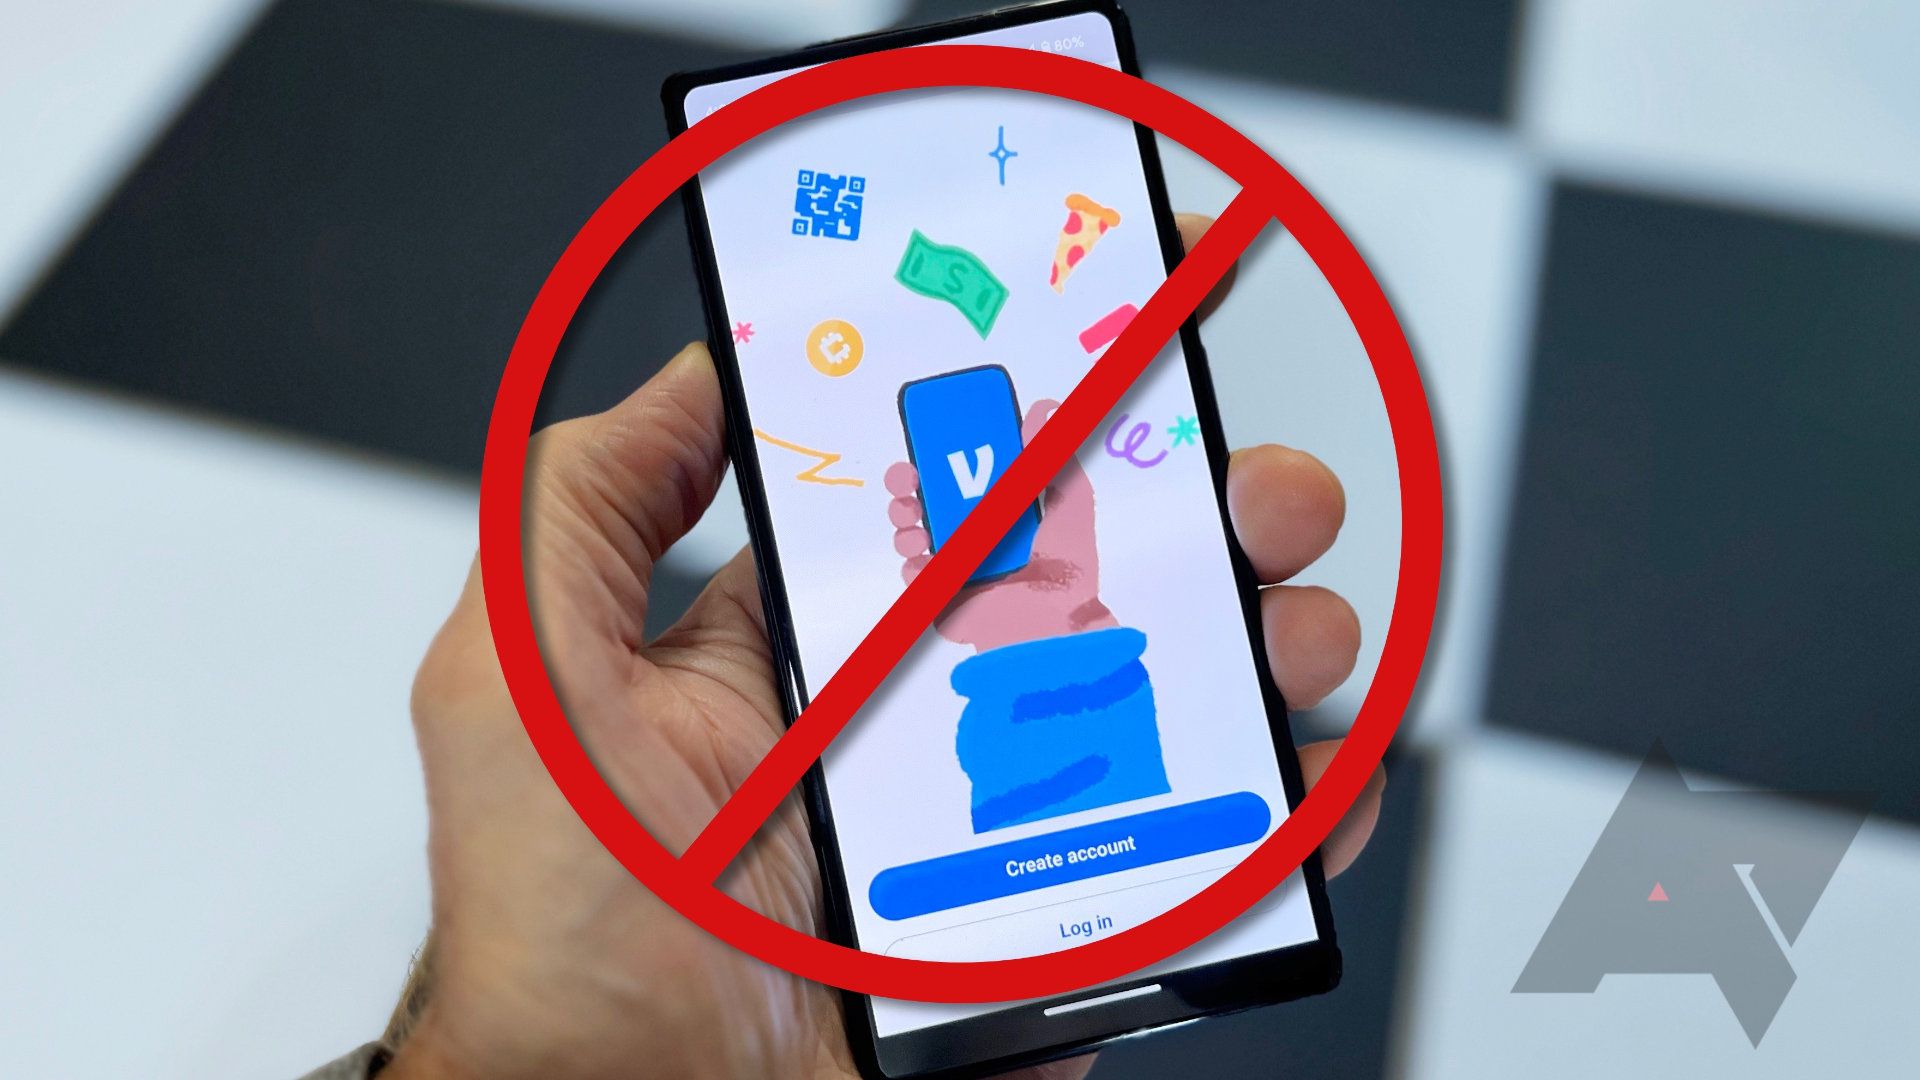 A do not symbol appears above a hand holding a smartphone with the Venmo app open.